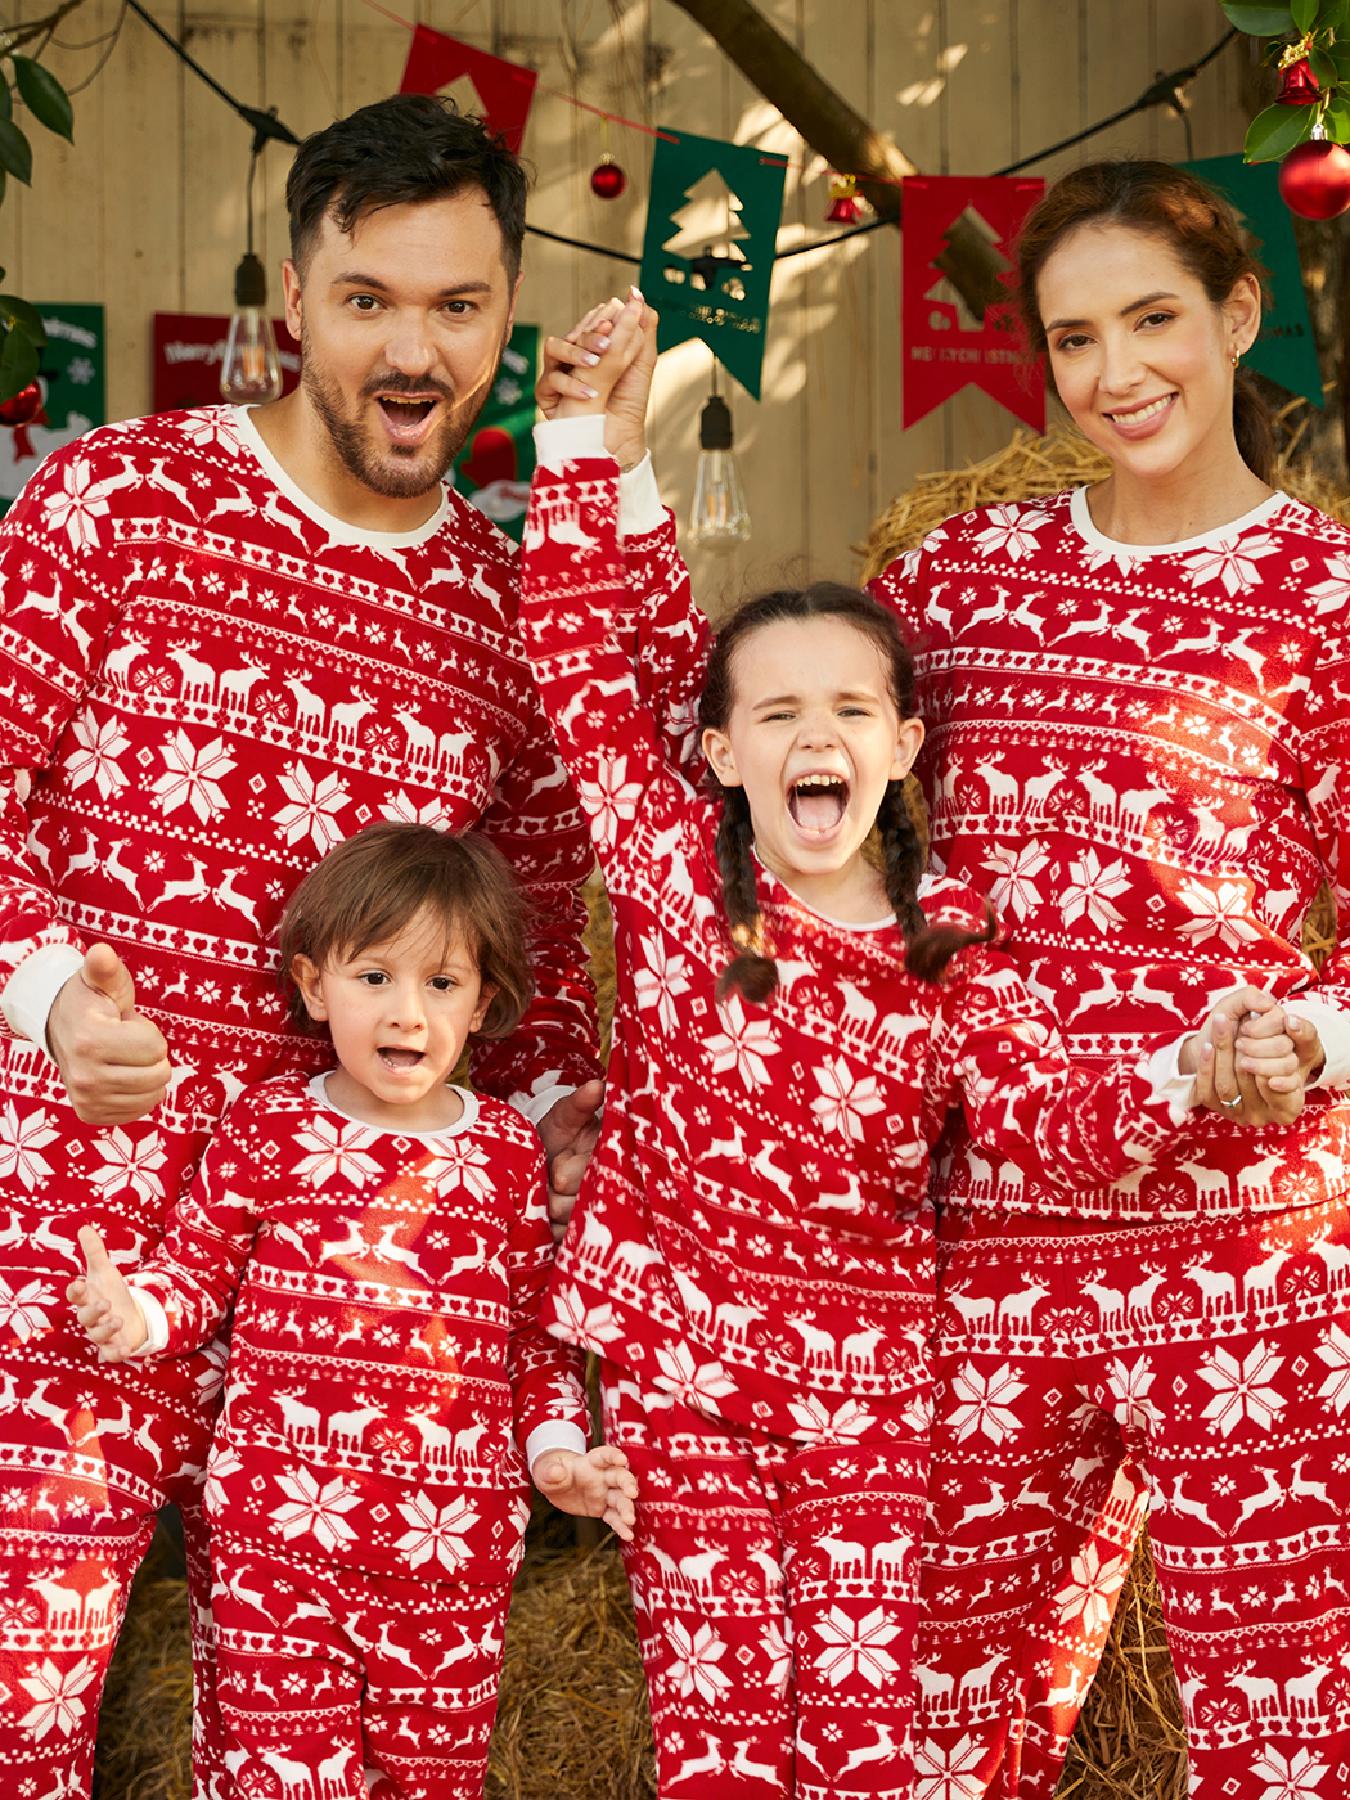 Family Matching Christmas All Over Print Red 3D Antlers Hooded Long-sleeve Onesies Pajamas Sets (Flame Resistant)